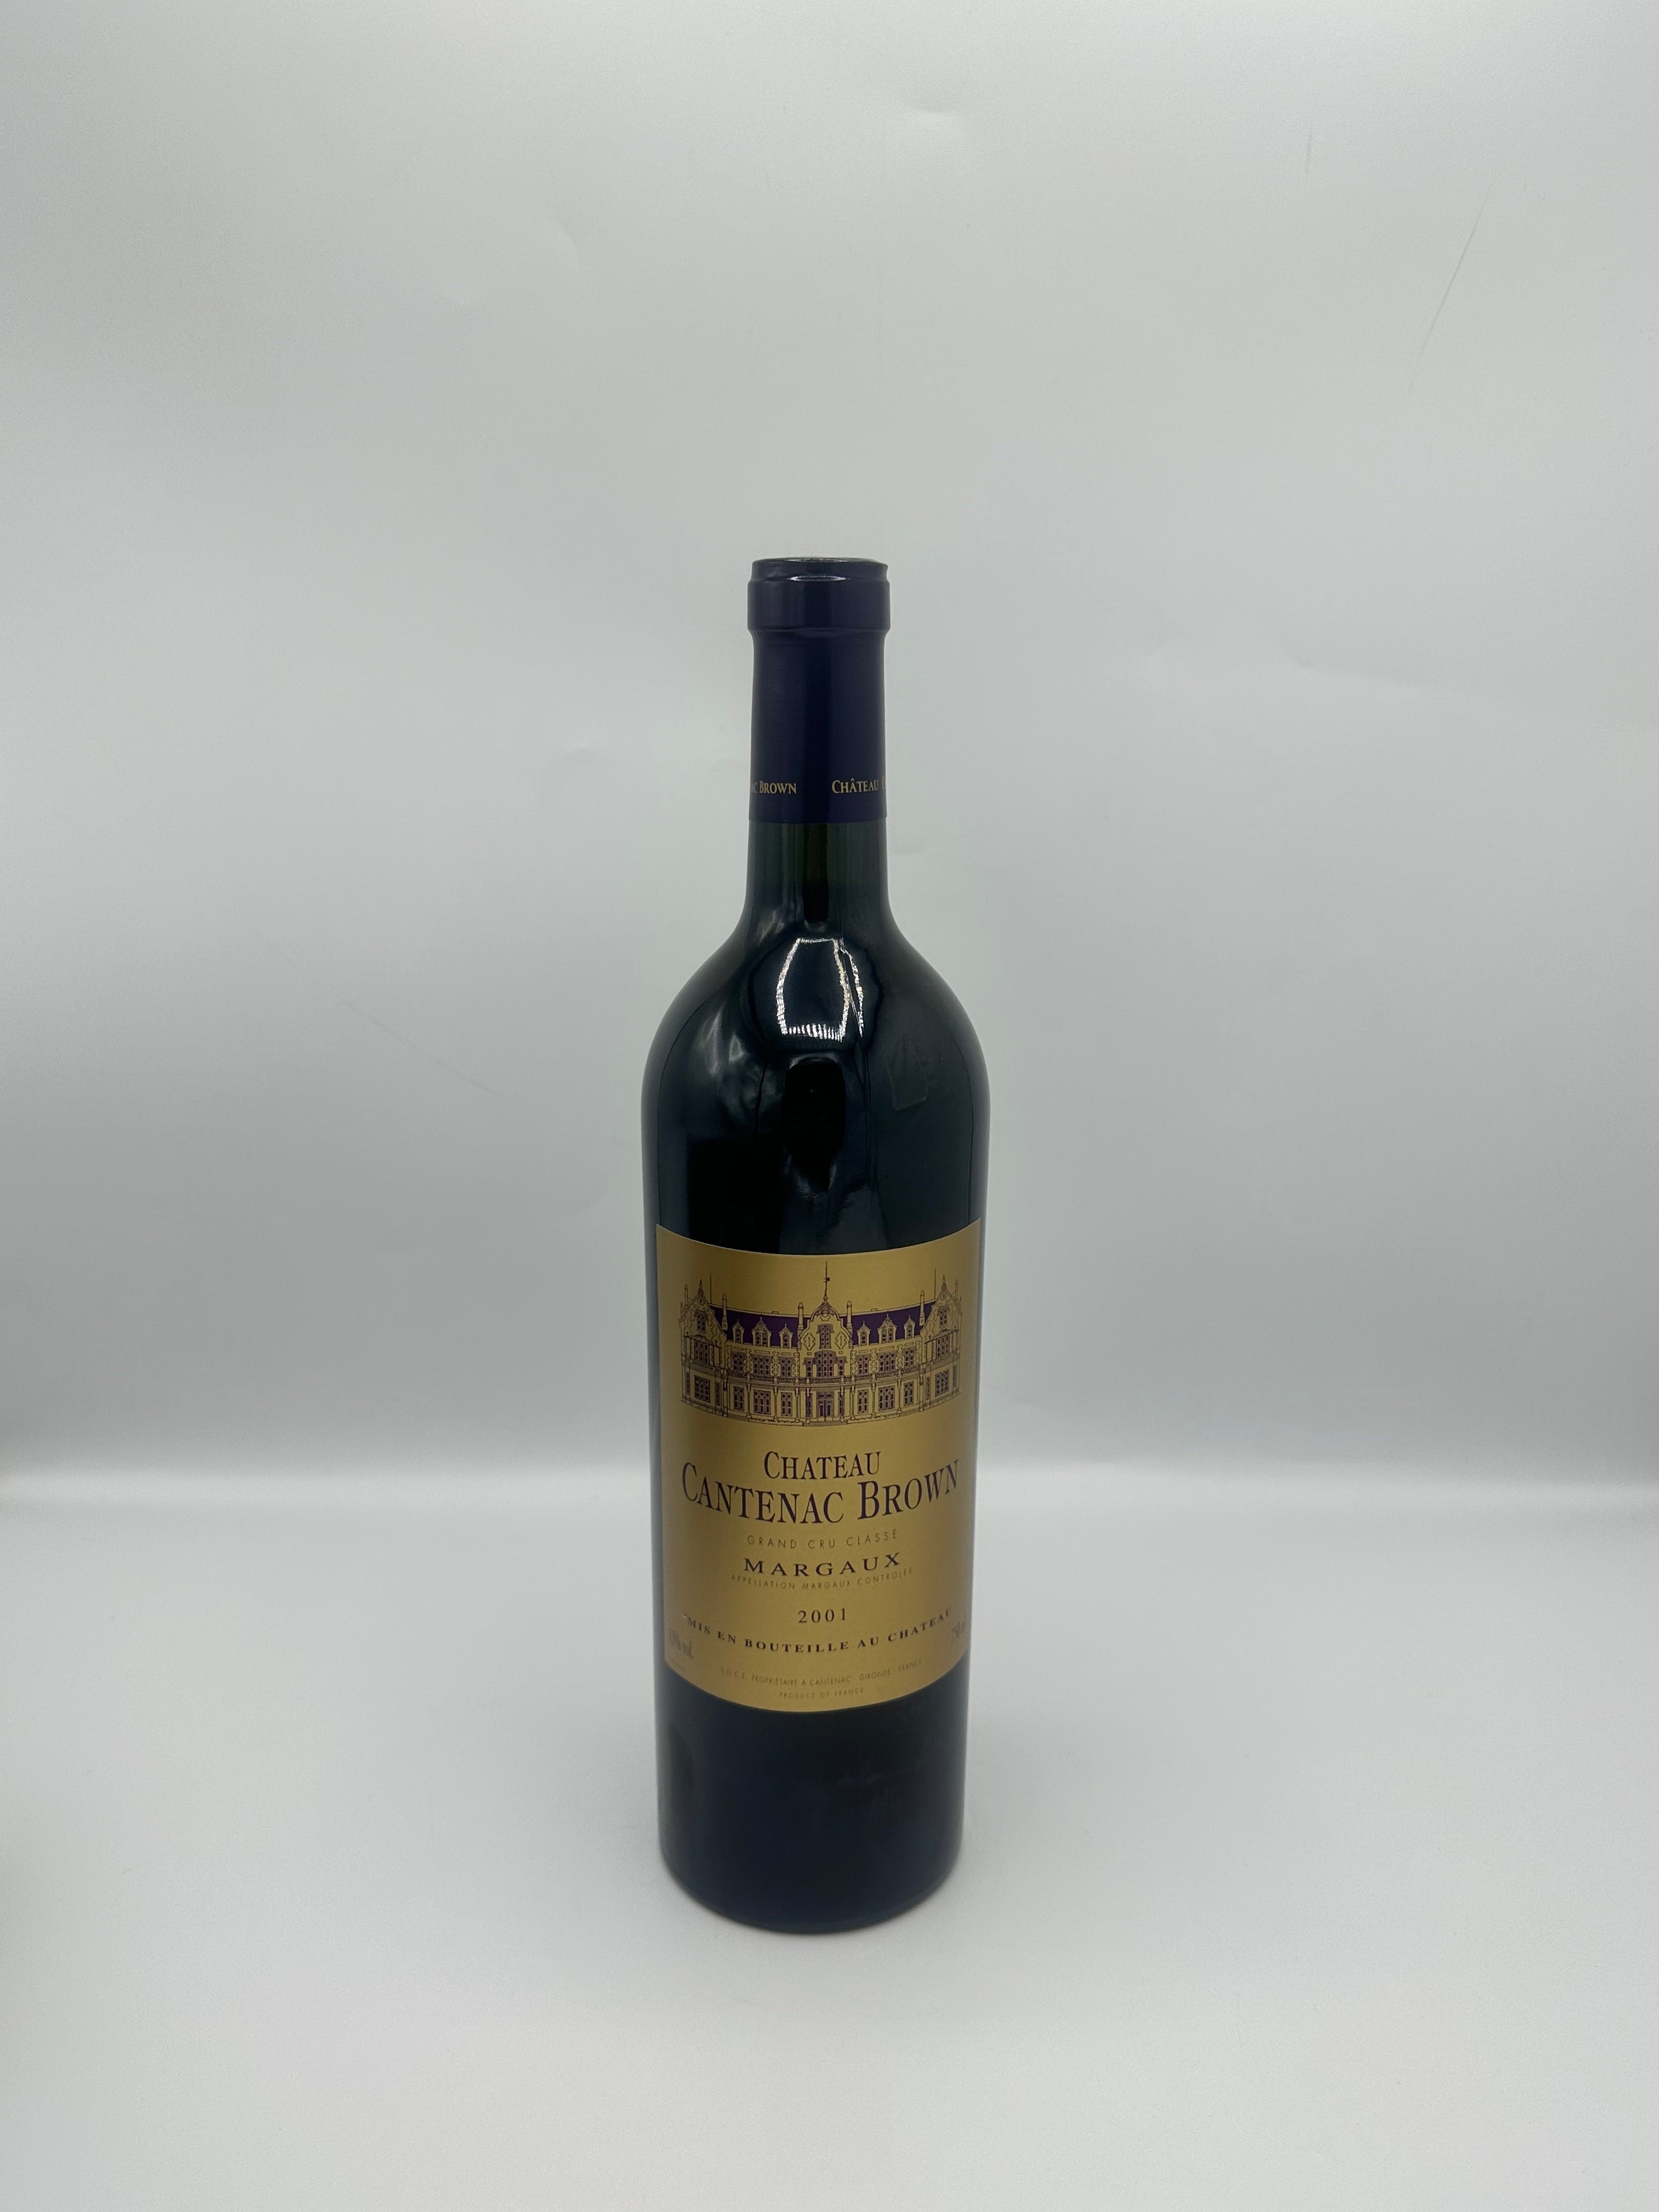 Margaux 2001 Red - Château Cantenac Brown 